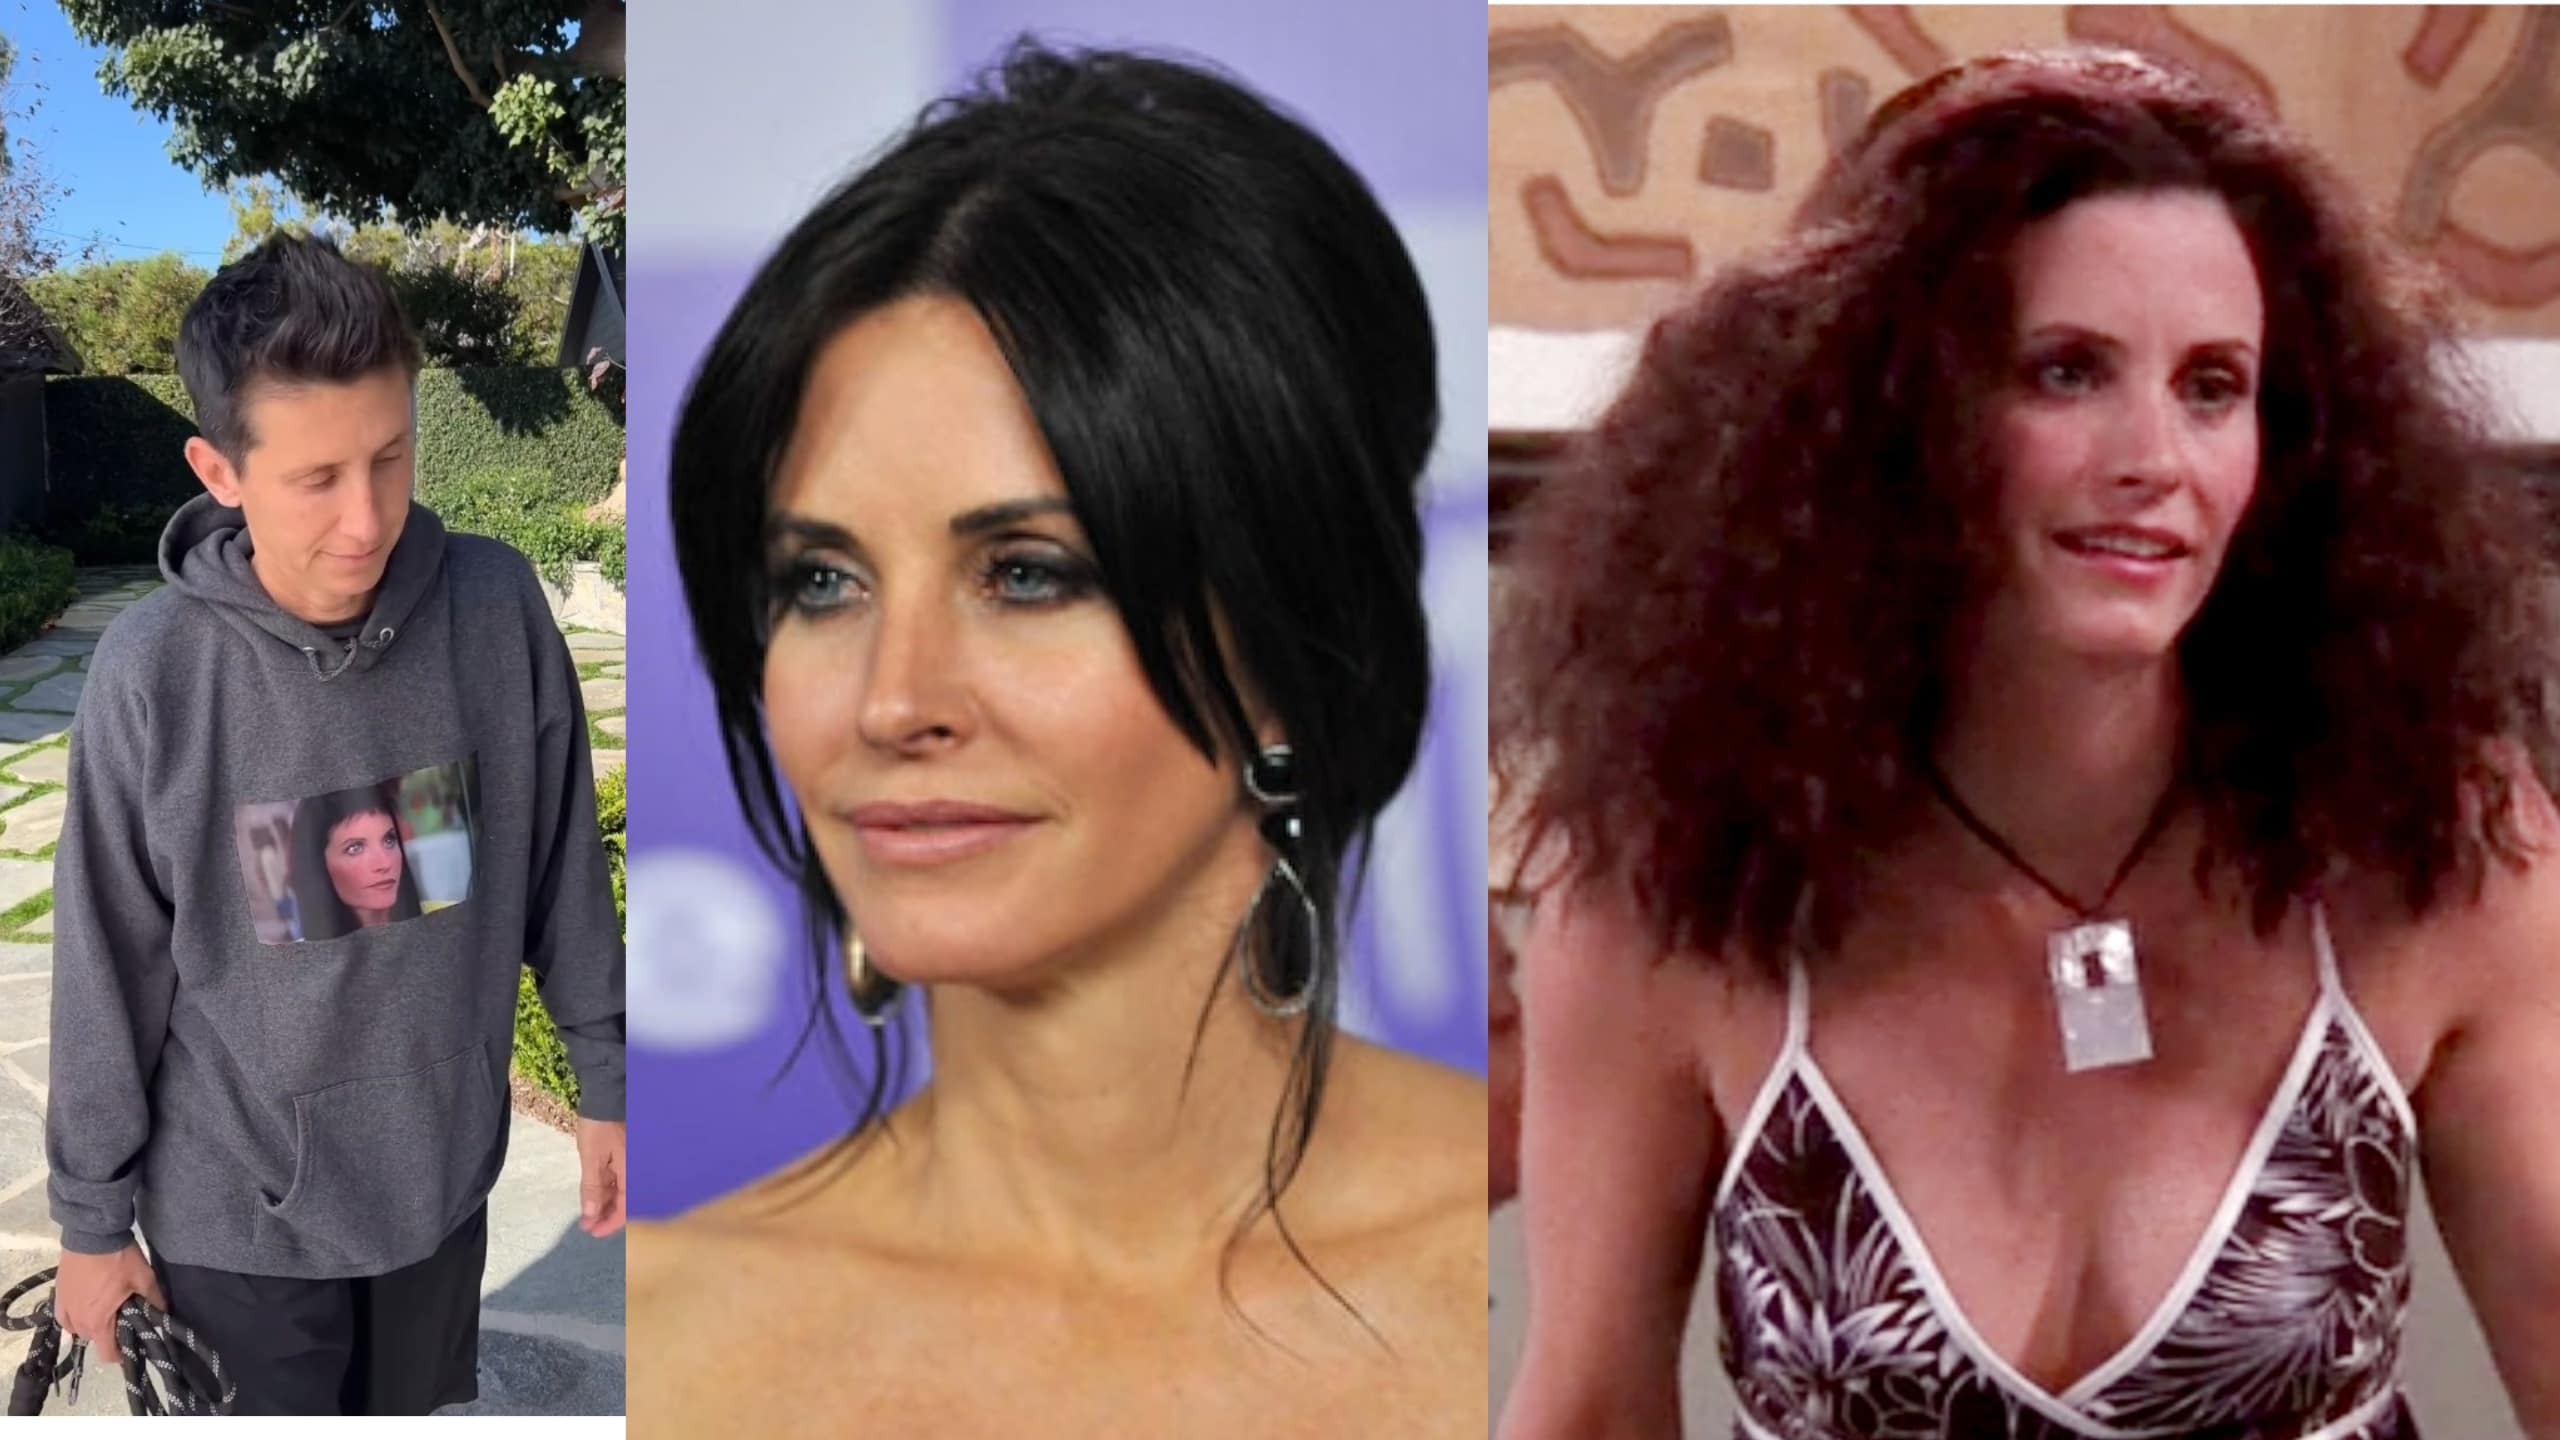 Courtney Cox jokes about her past hairstyles